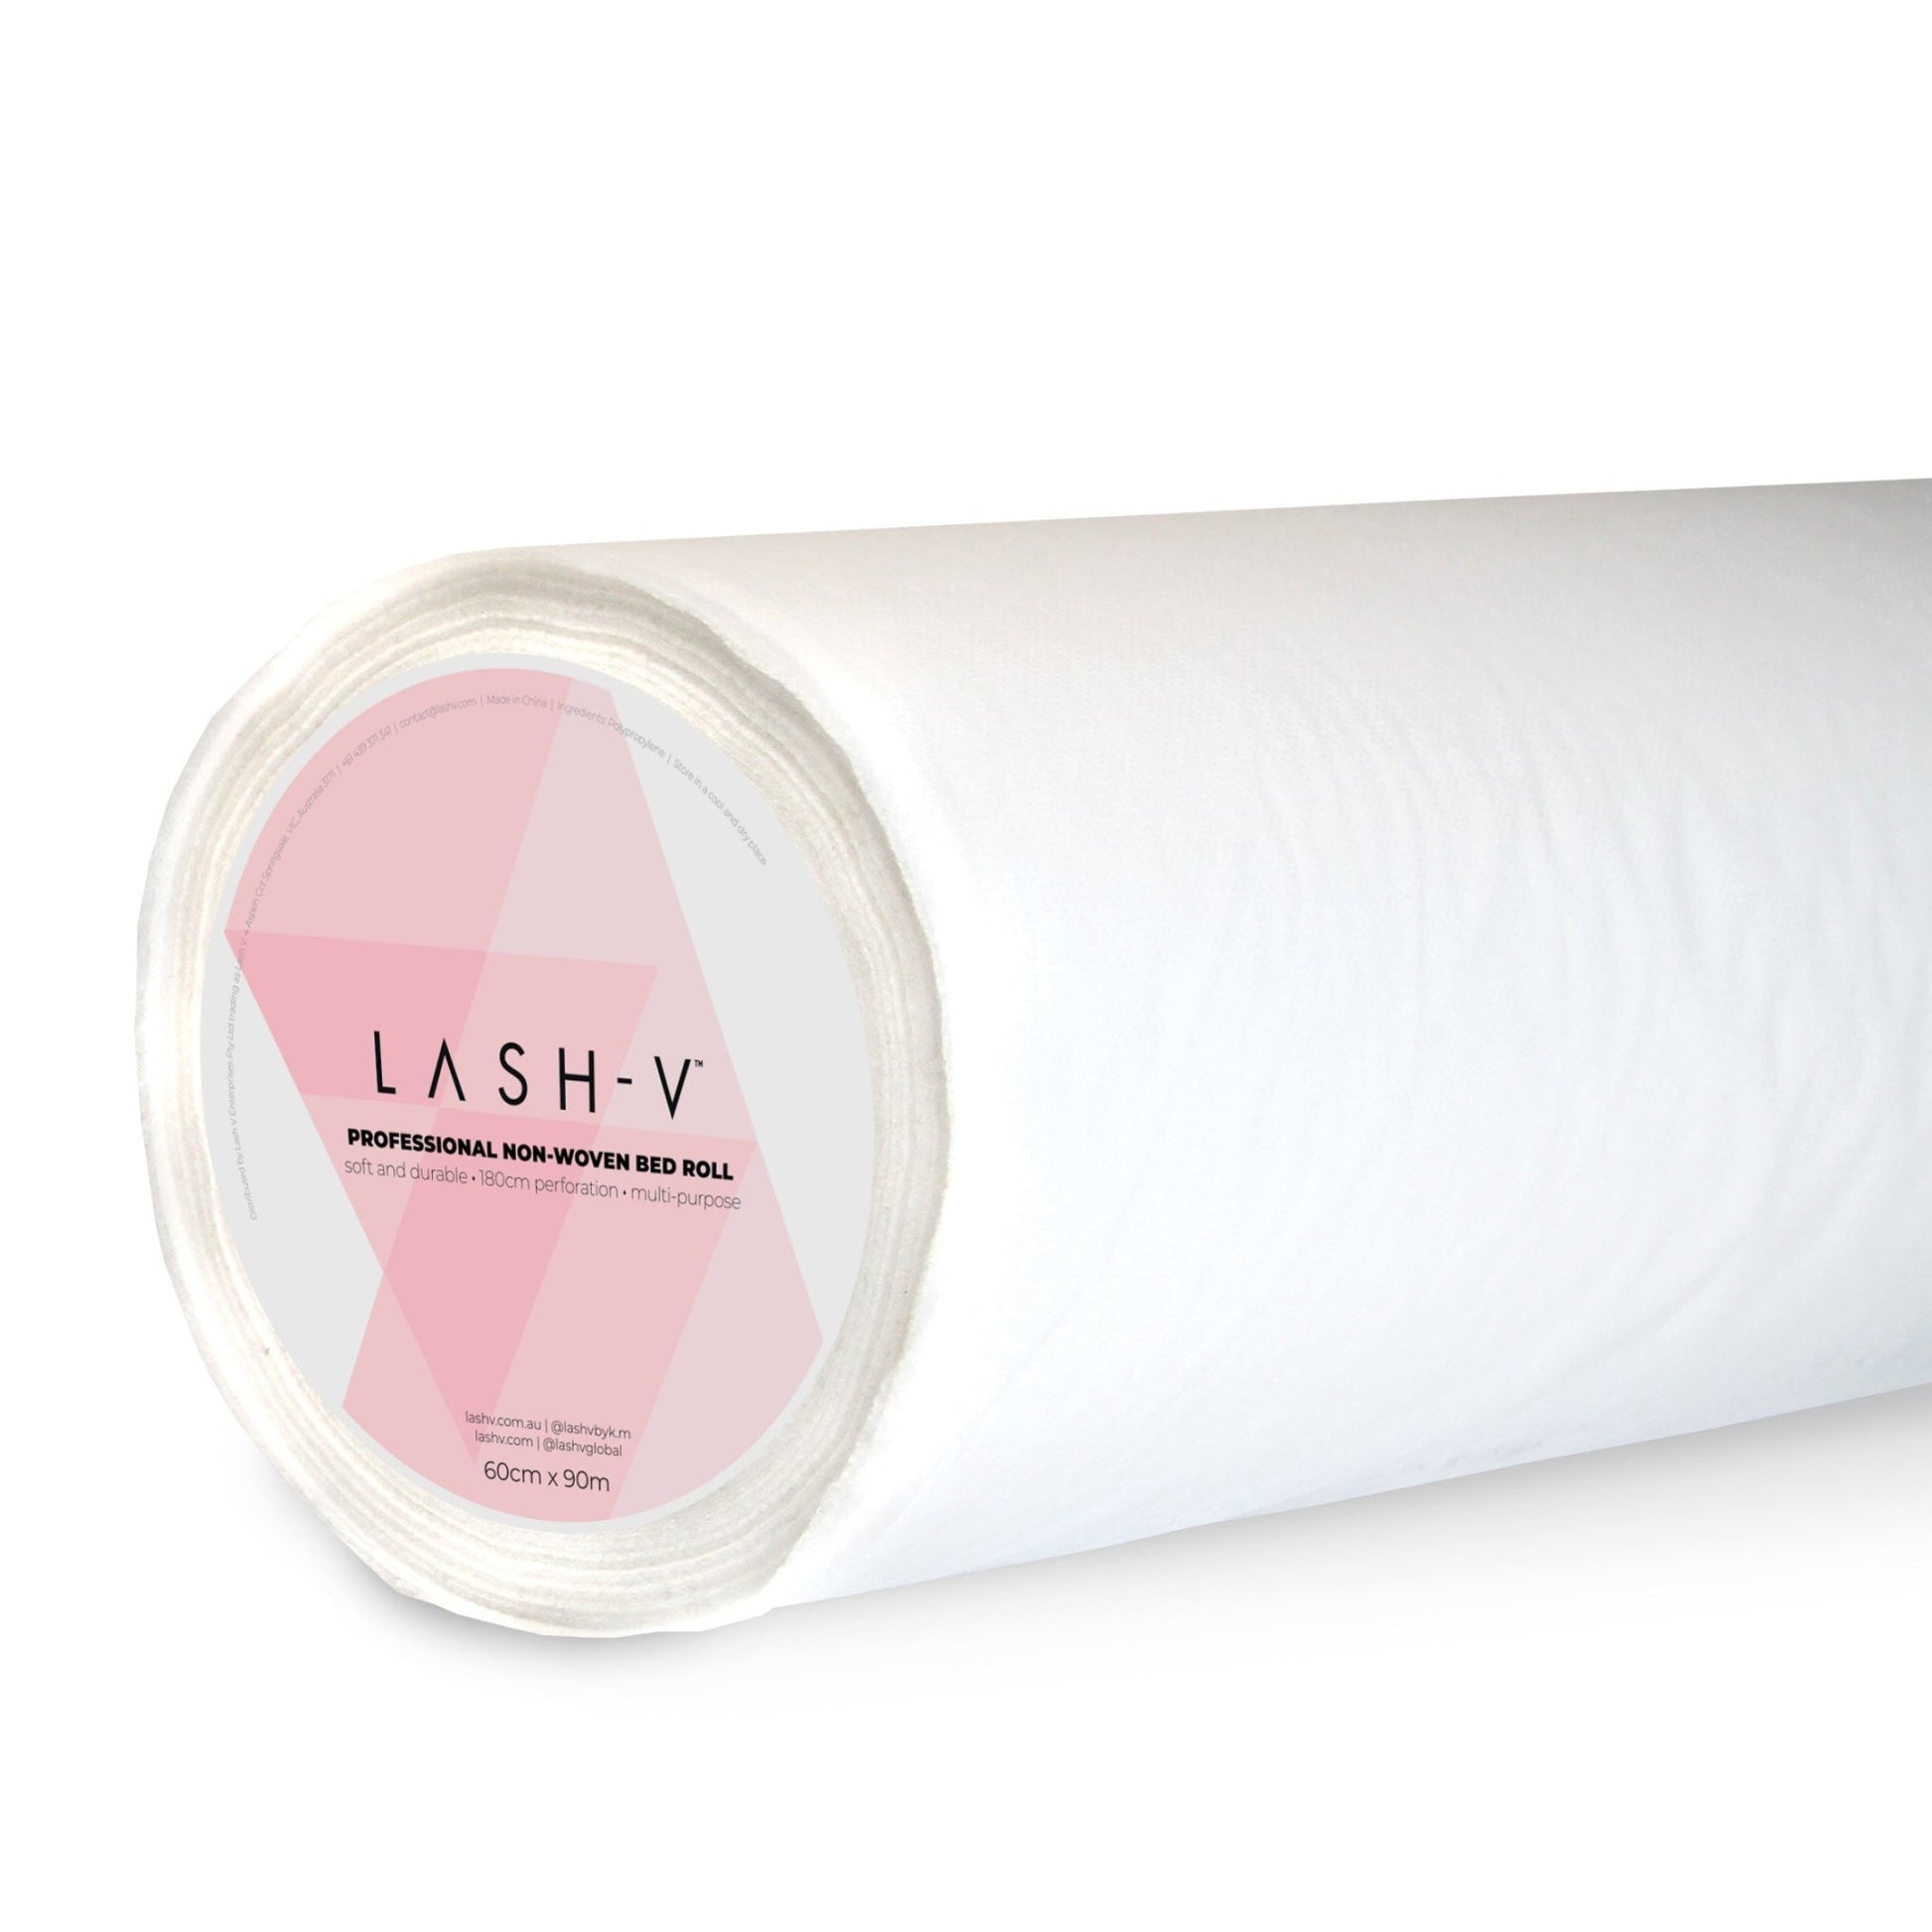 Bed Roll - Professional Non-Woven | 60cm X 90m - Perforated 180cm - LASH V